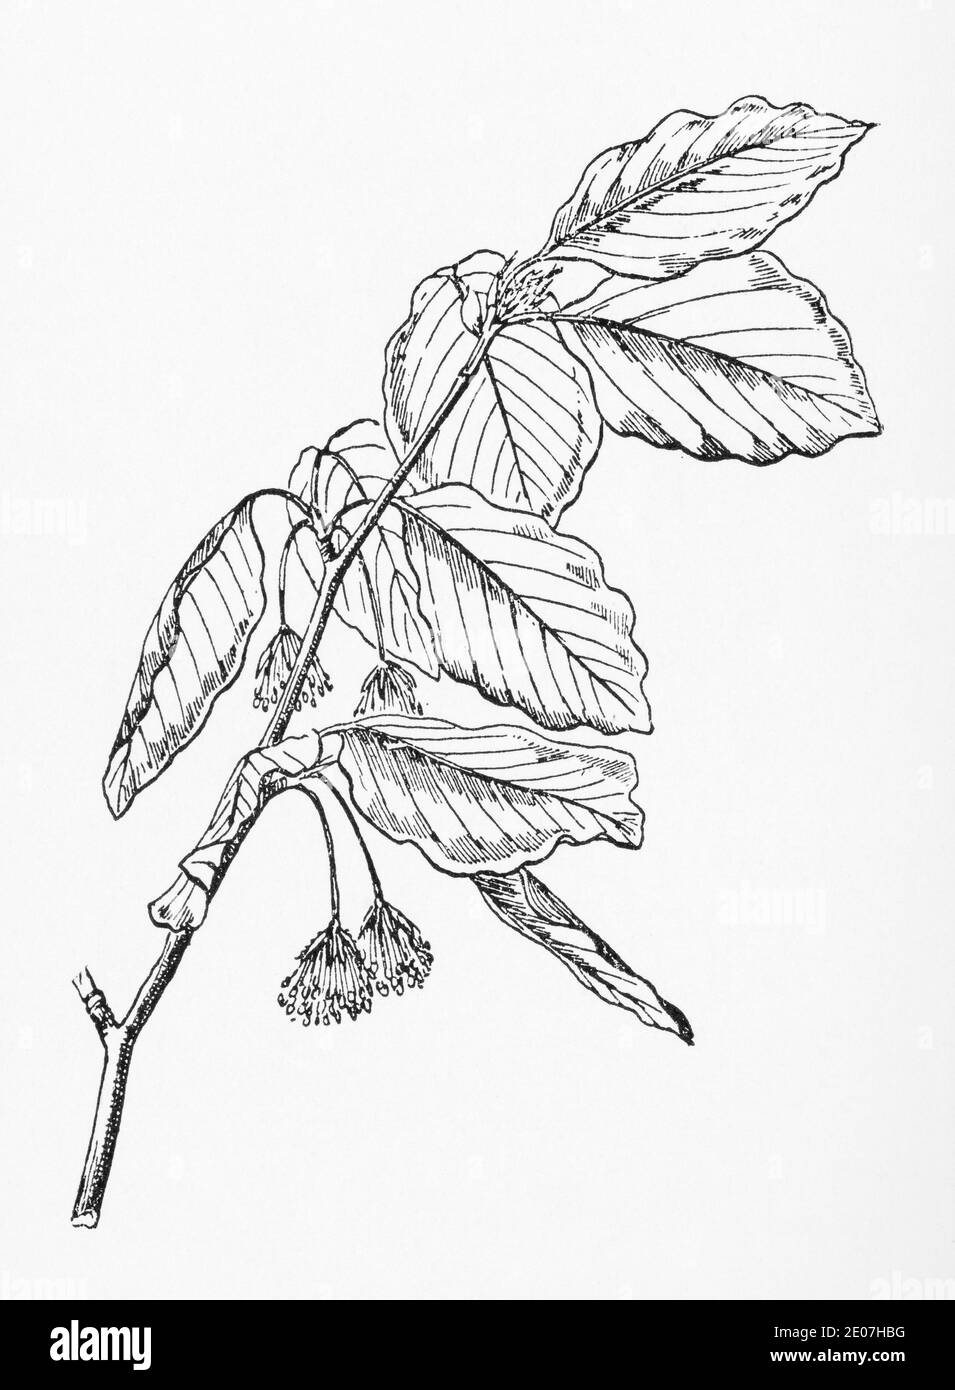 Old botanical illustration engraving of Beech / Fagus sylvatica. Nuts edible. Traditional medicinal herbal plant. See Notes Stock Photo